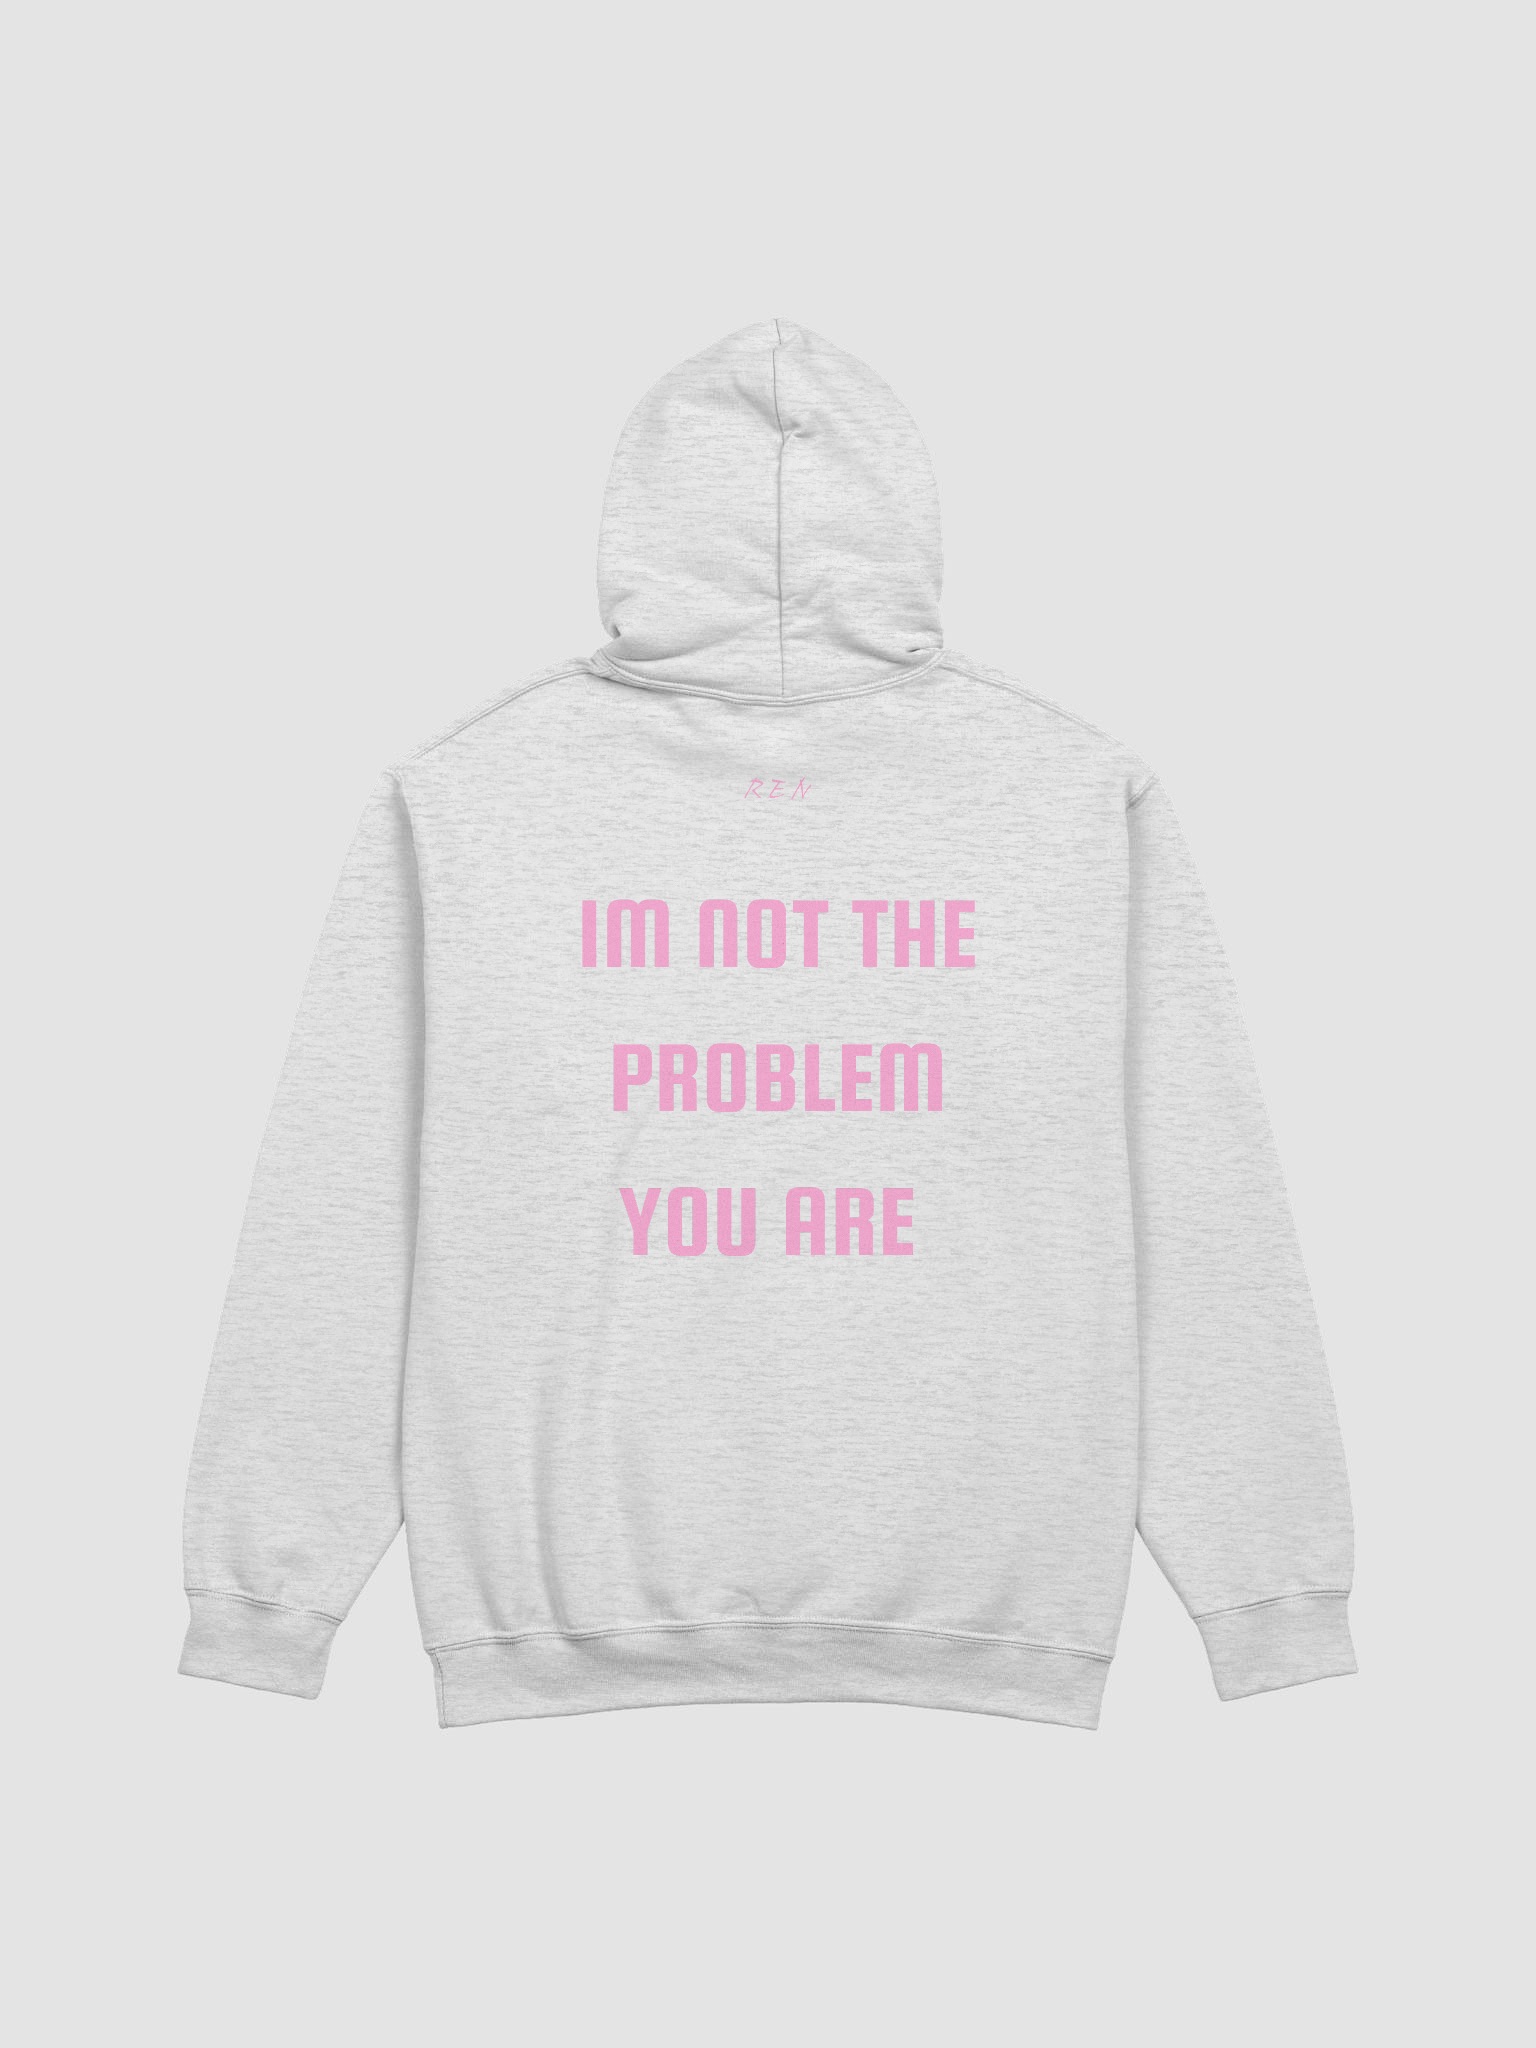 1 bow not the problem hoodie